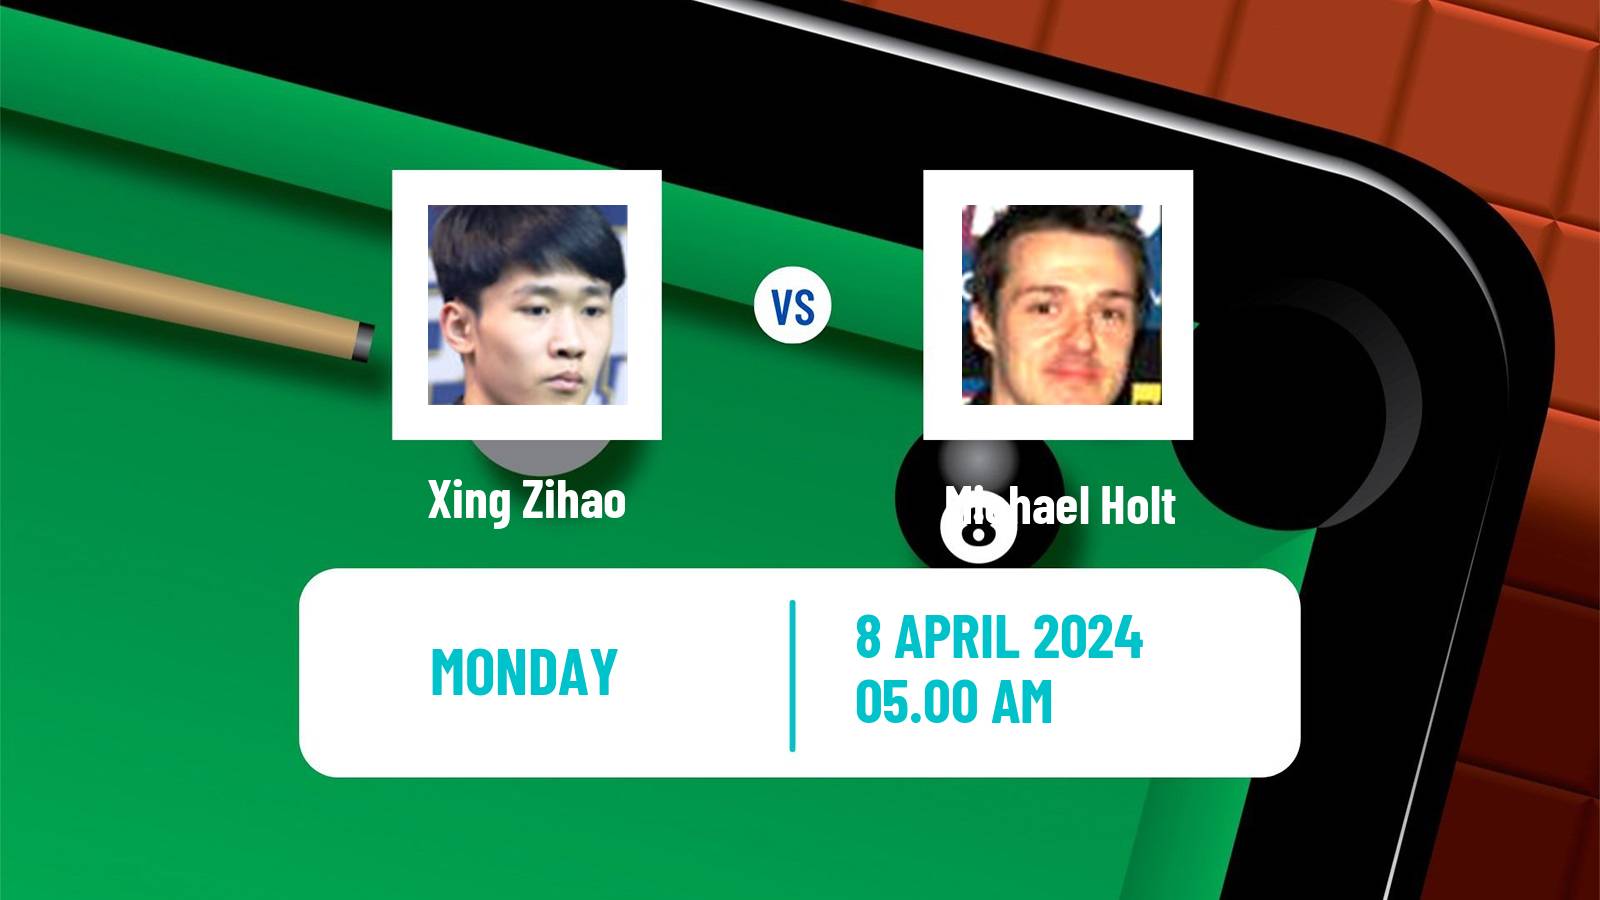 Snooker World Championship Xing Zihao - Michael Holt